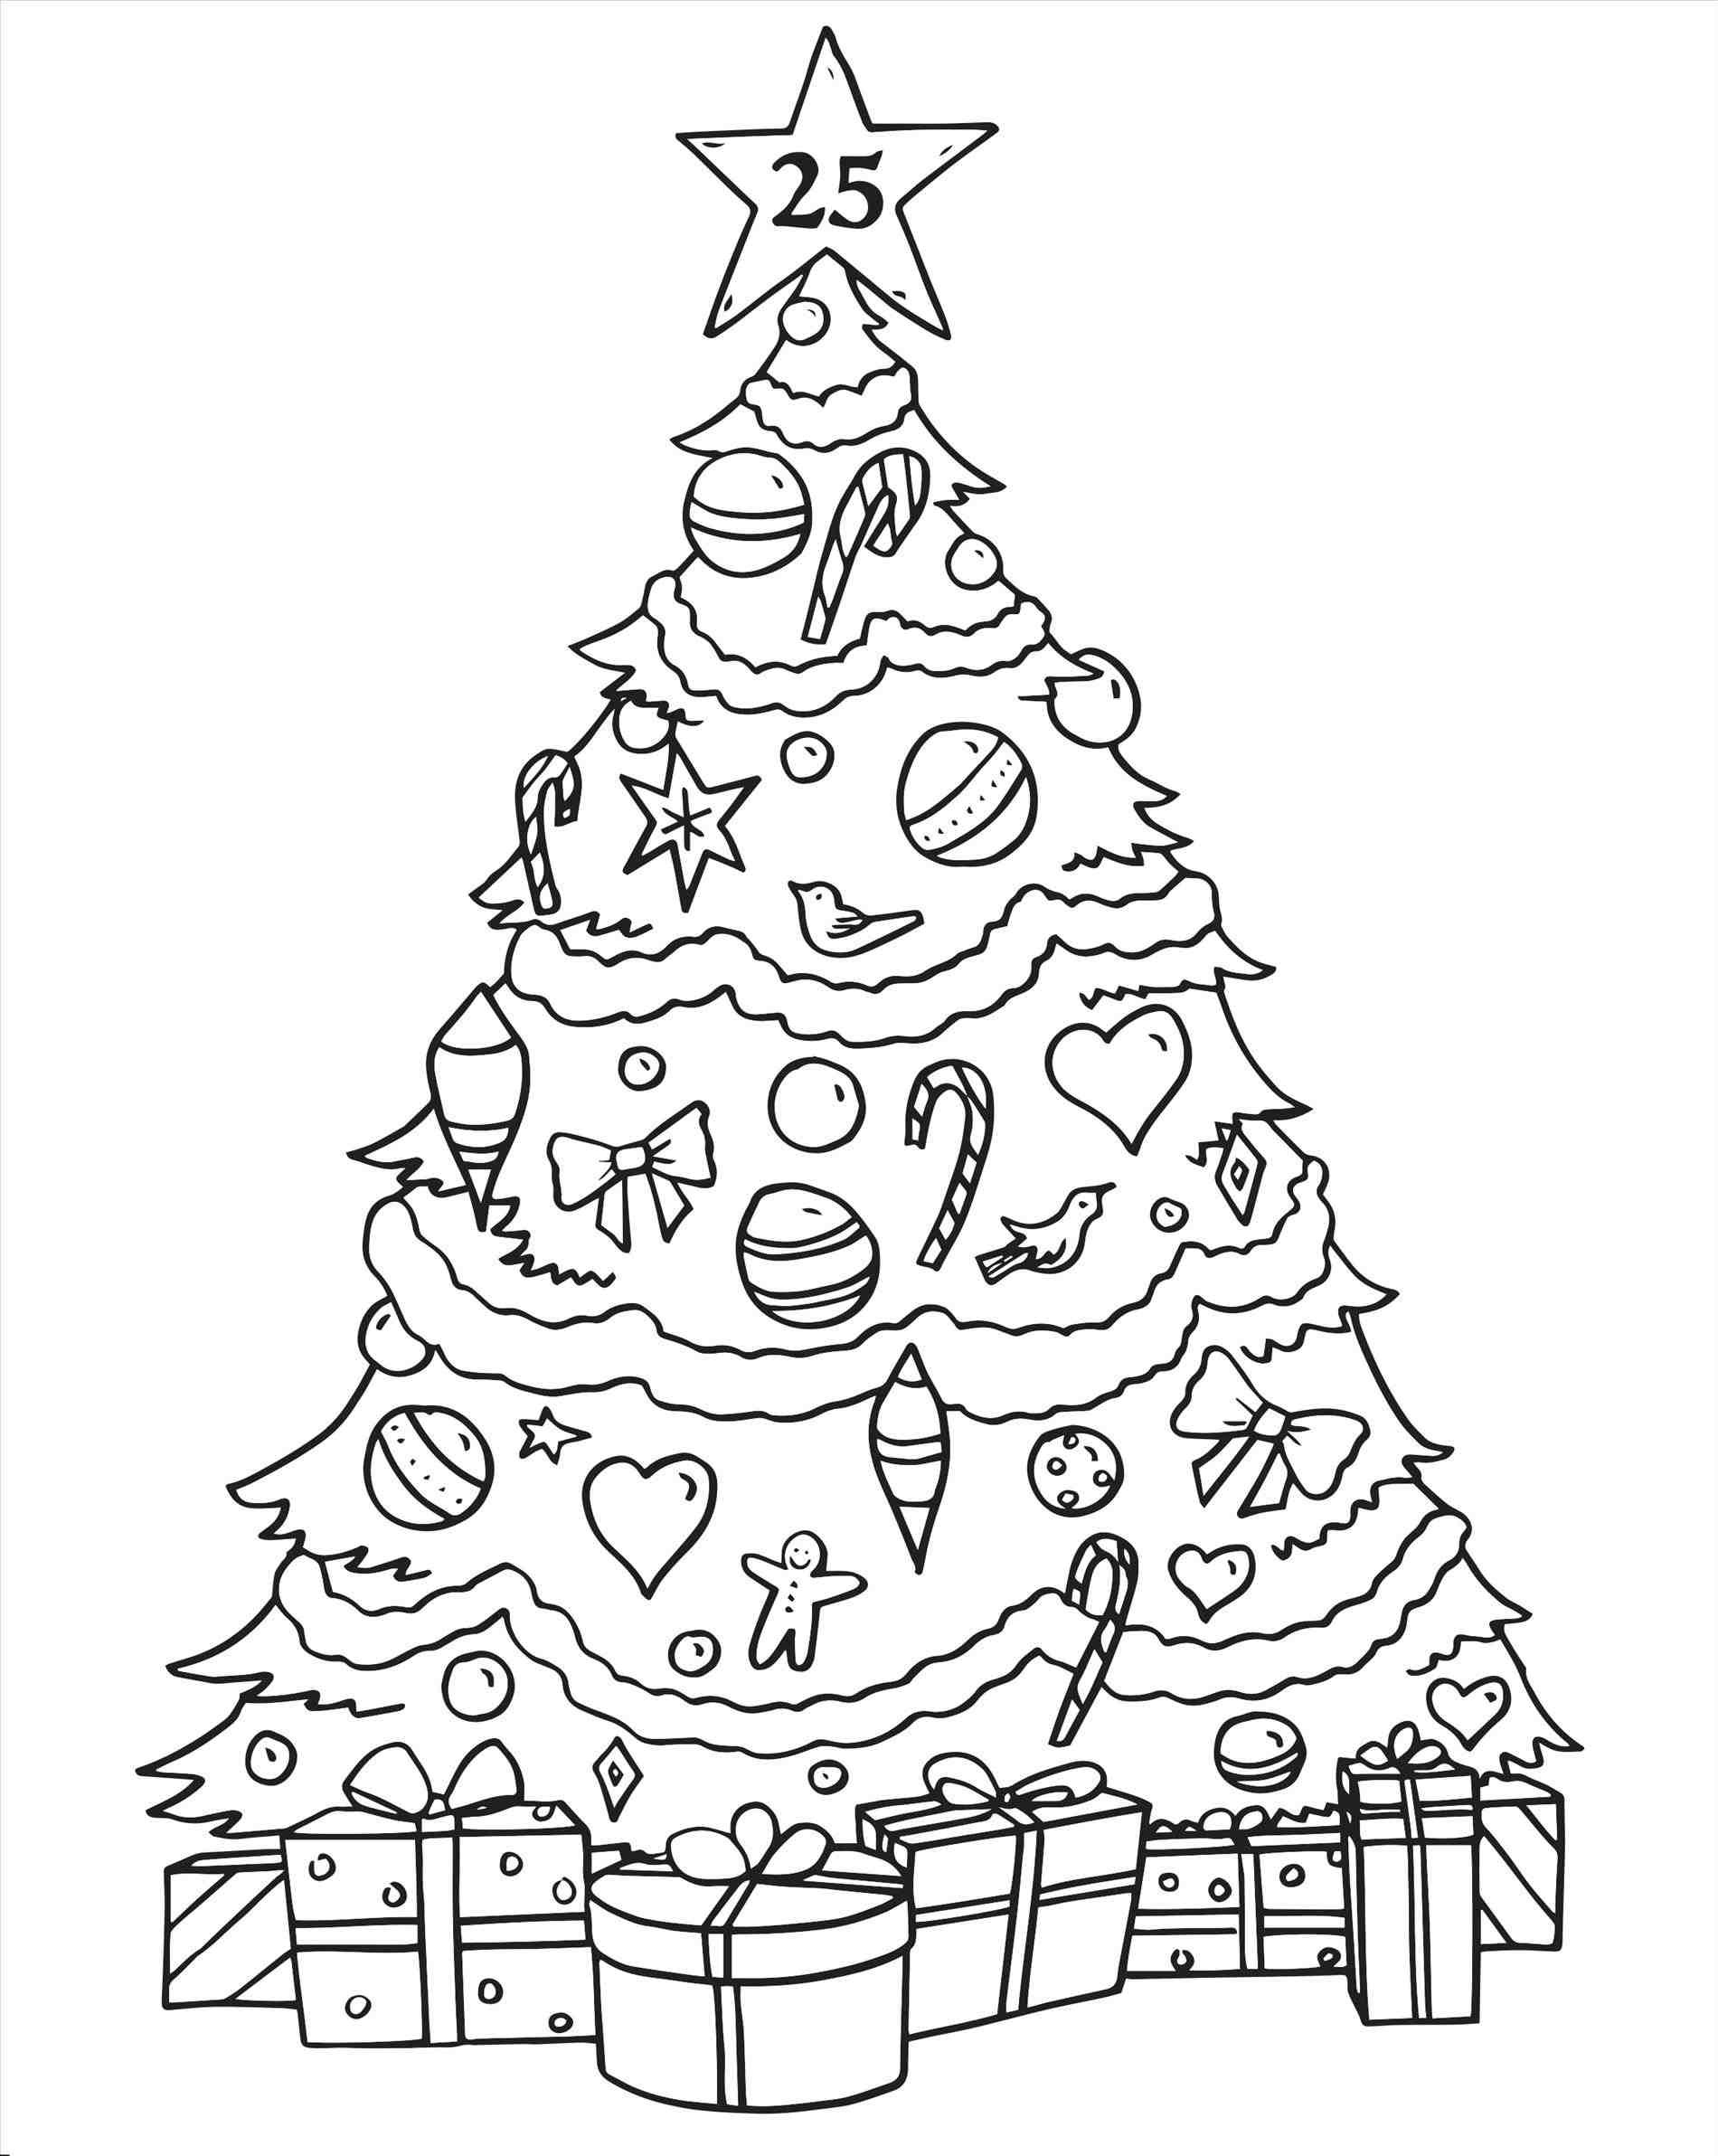 Christmas Tree Coloring Pages For Kids
 Christmas Tree Drawing For Kids at GetDrawings